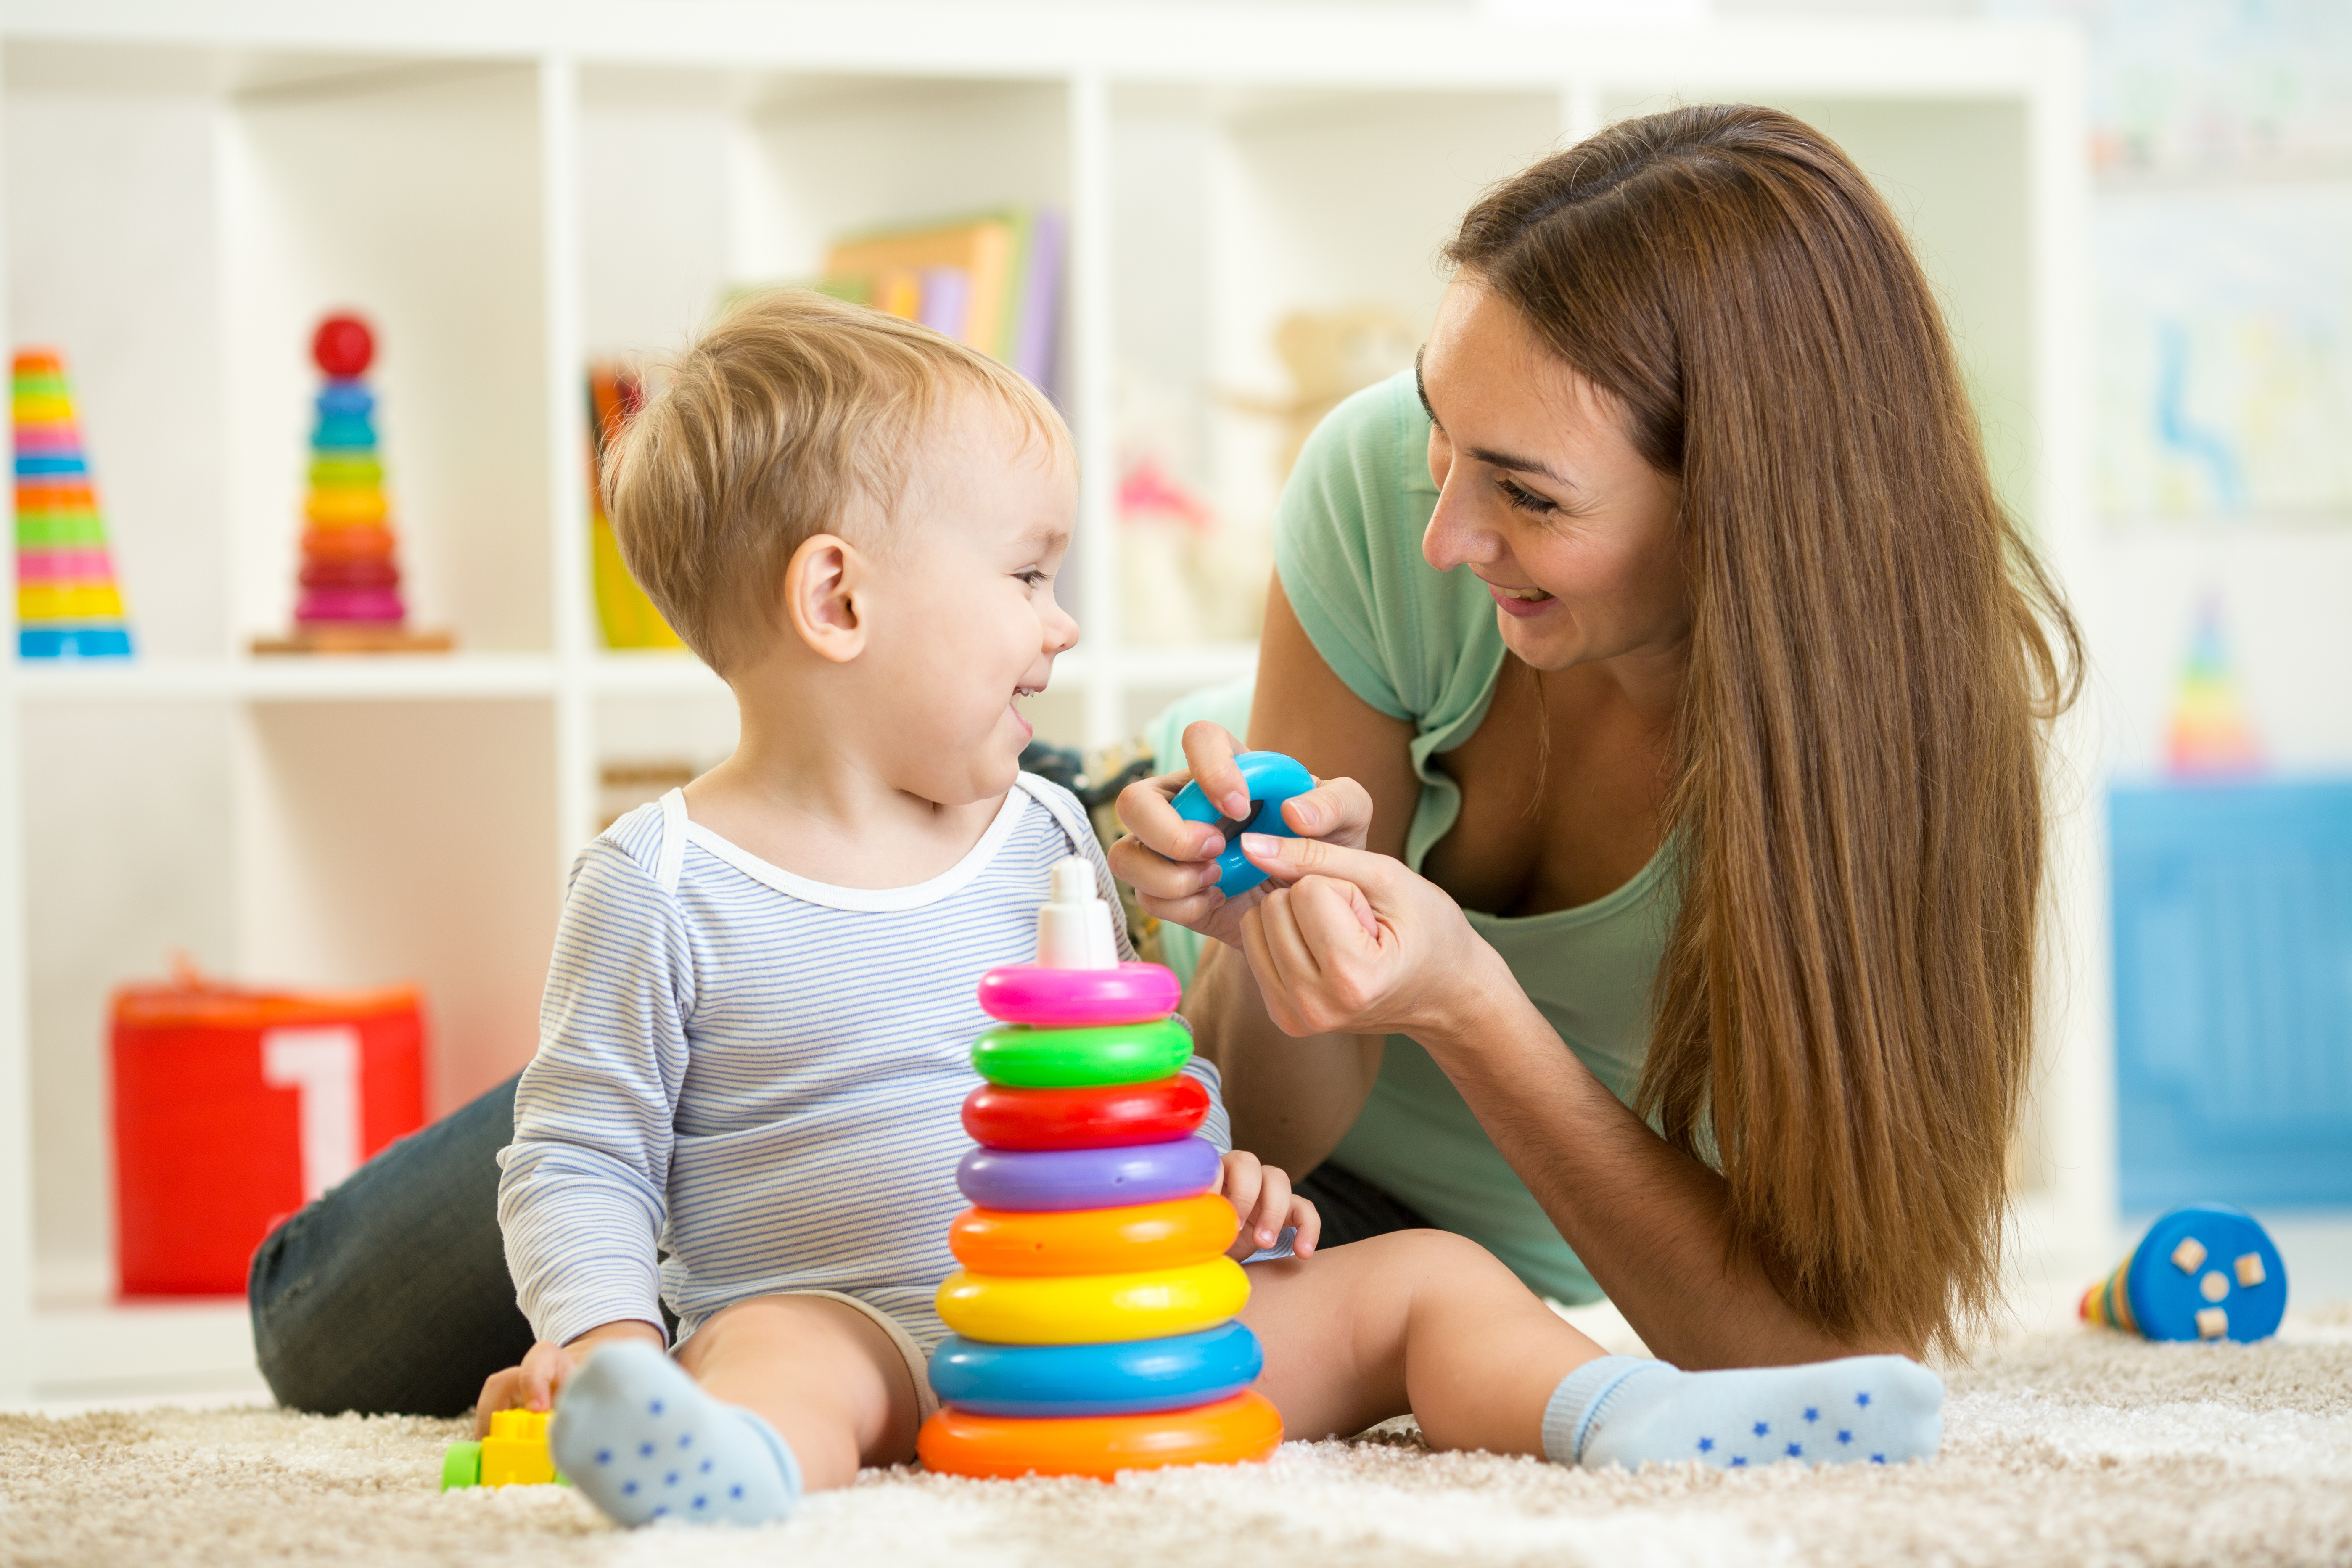 cute mother and child boy play together indoors at home